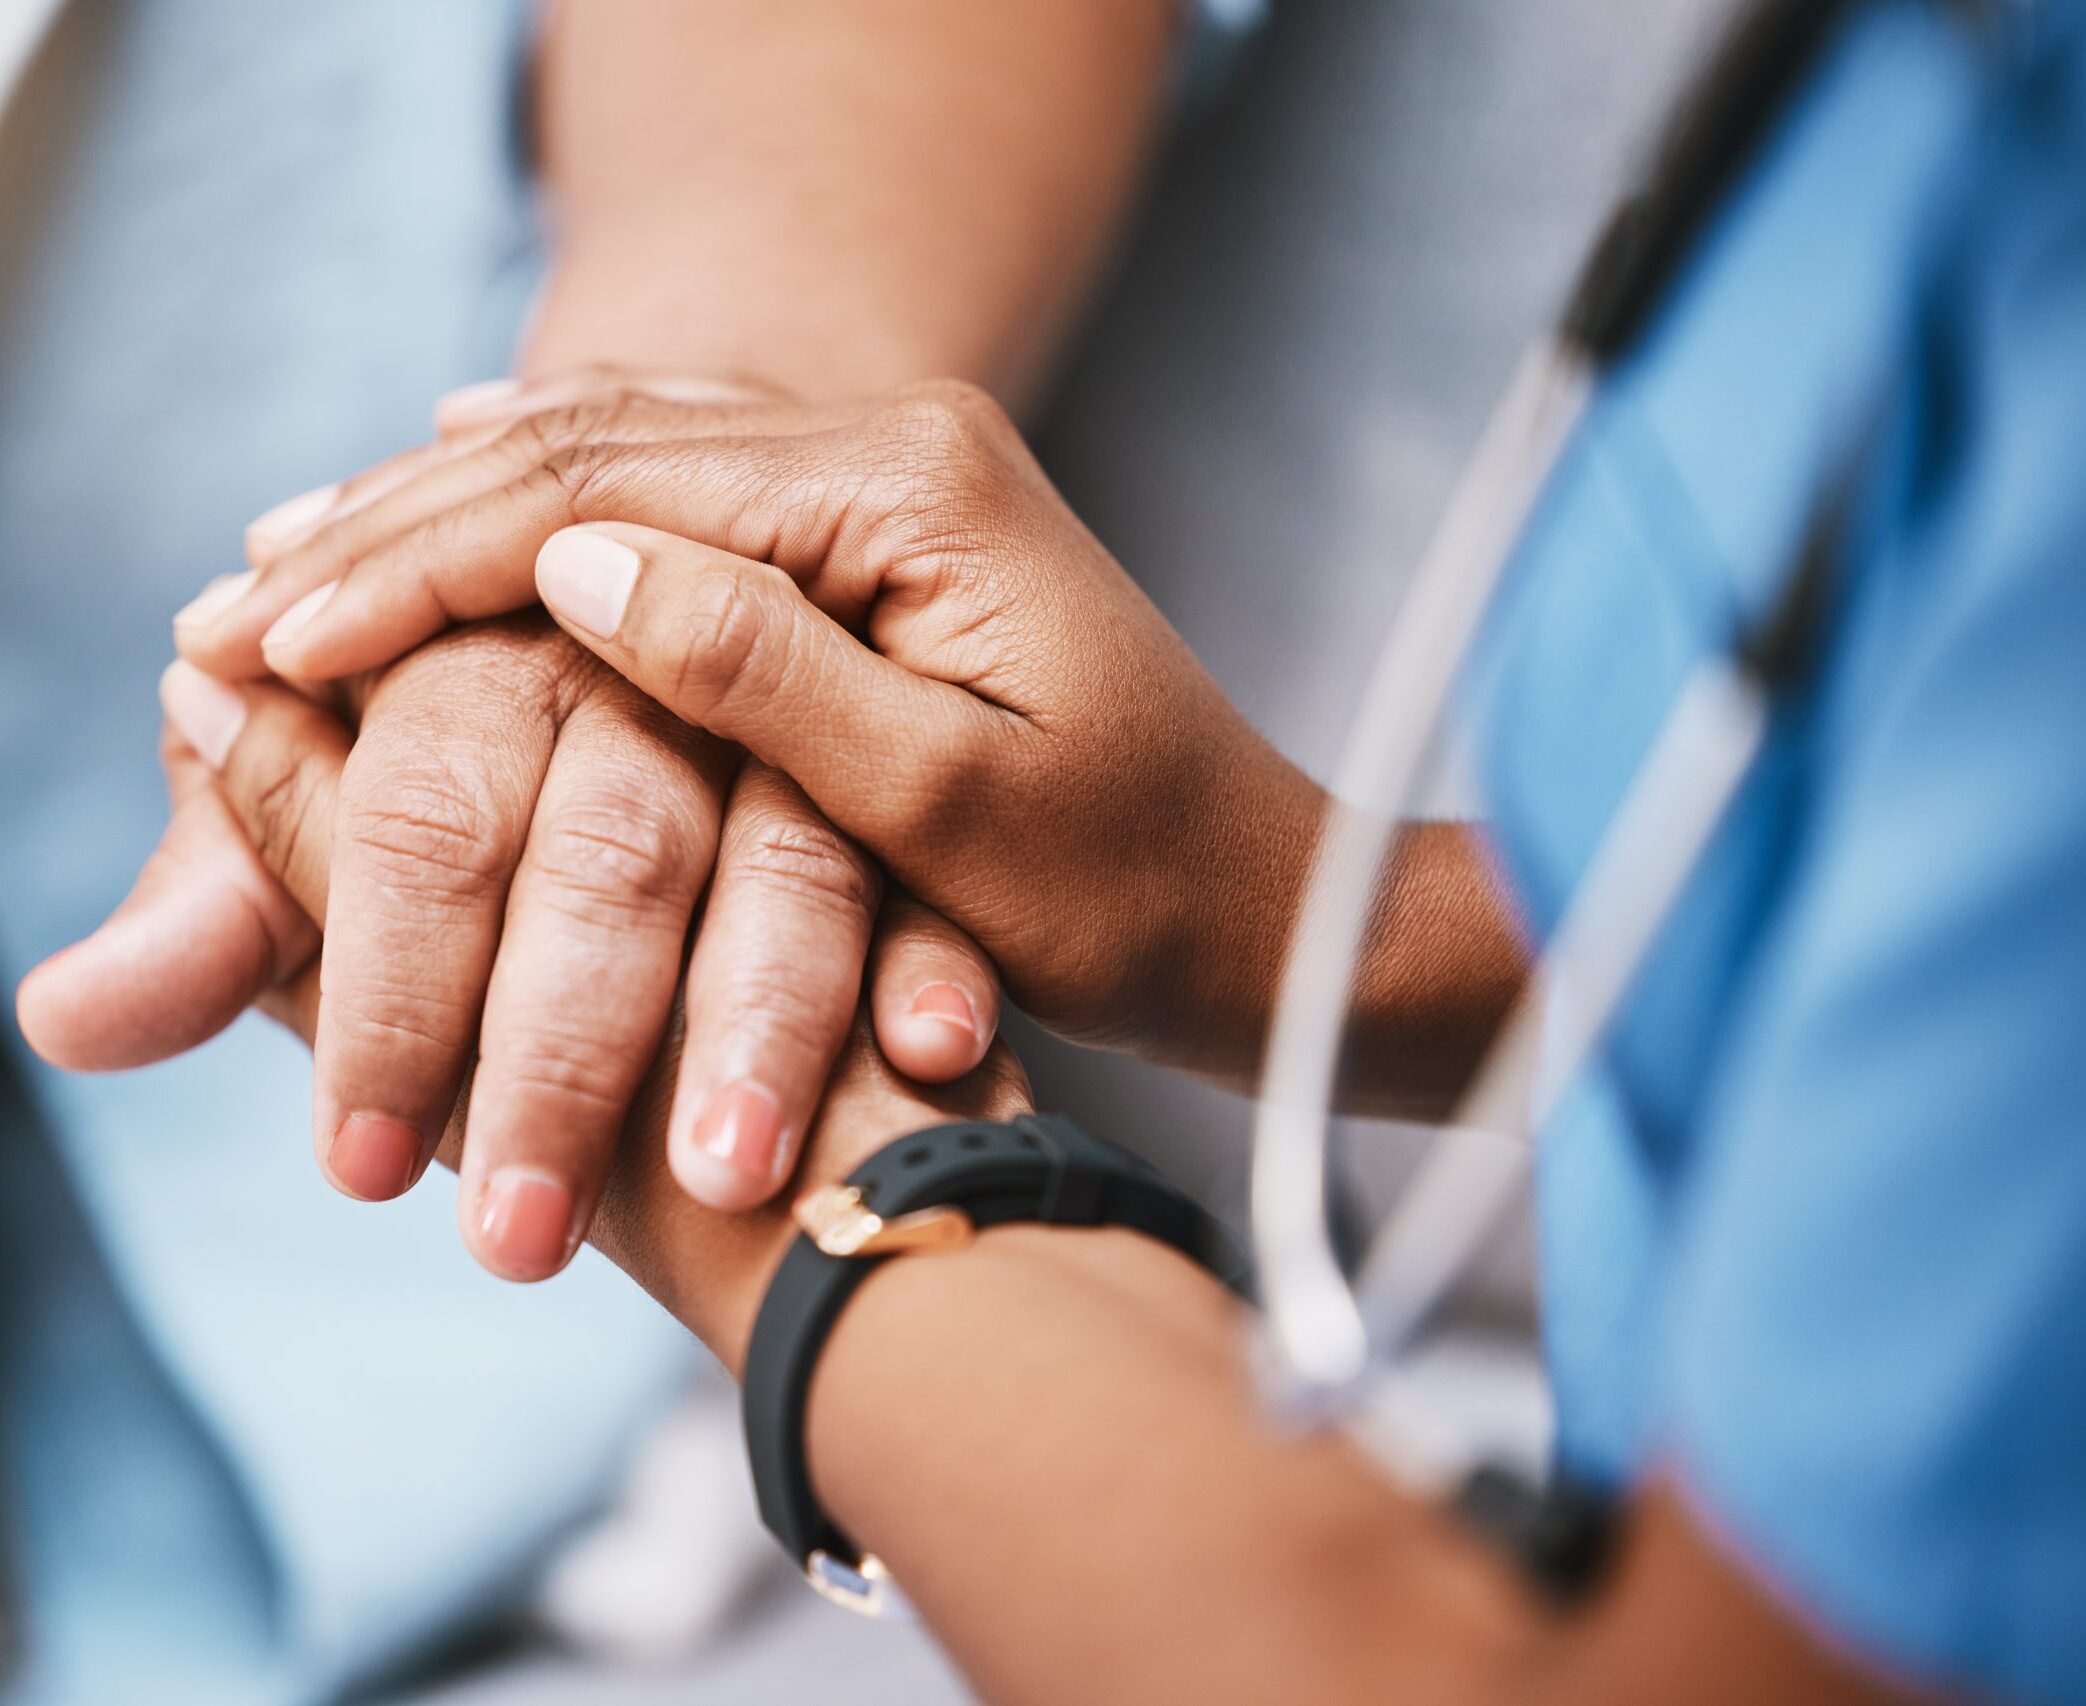 MPL insurance: Empathy, trust and nurse holding hands with patient for help